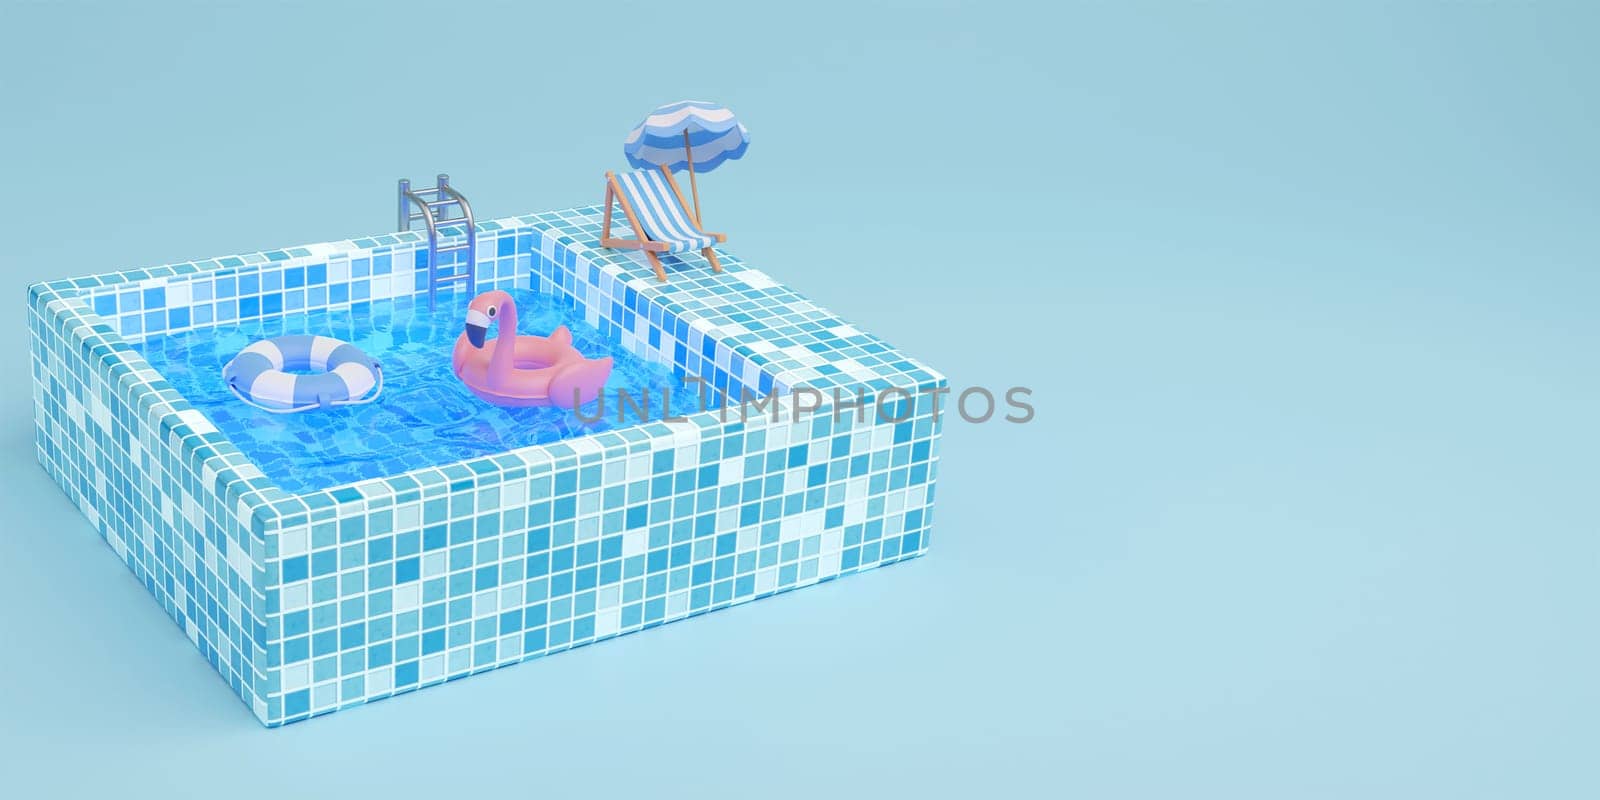 Swimming pool with lounge chairs, umbrella and Pink flamingo. Creative summer concept idea with copy space. illustration banner 3d rendering illustration.